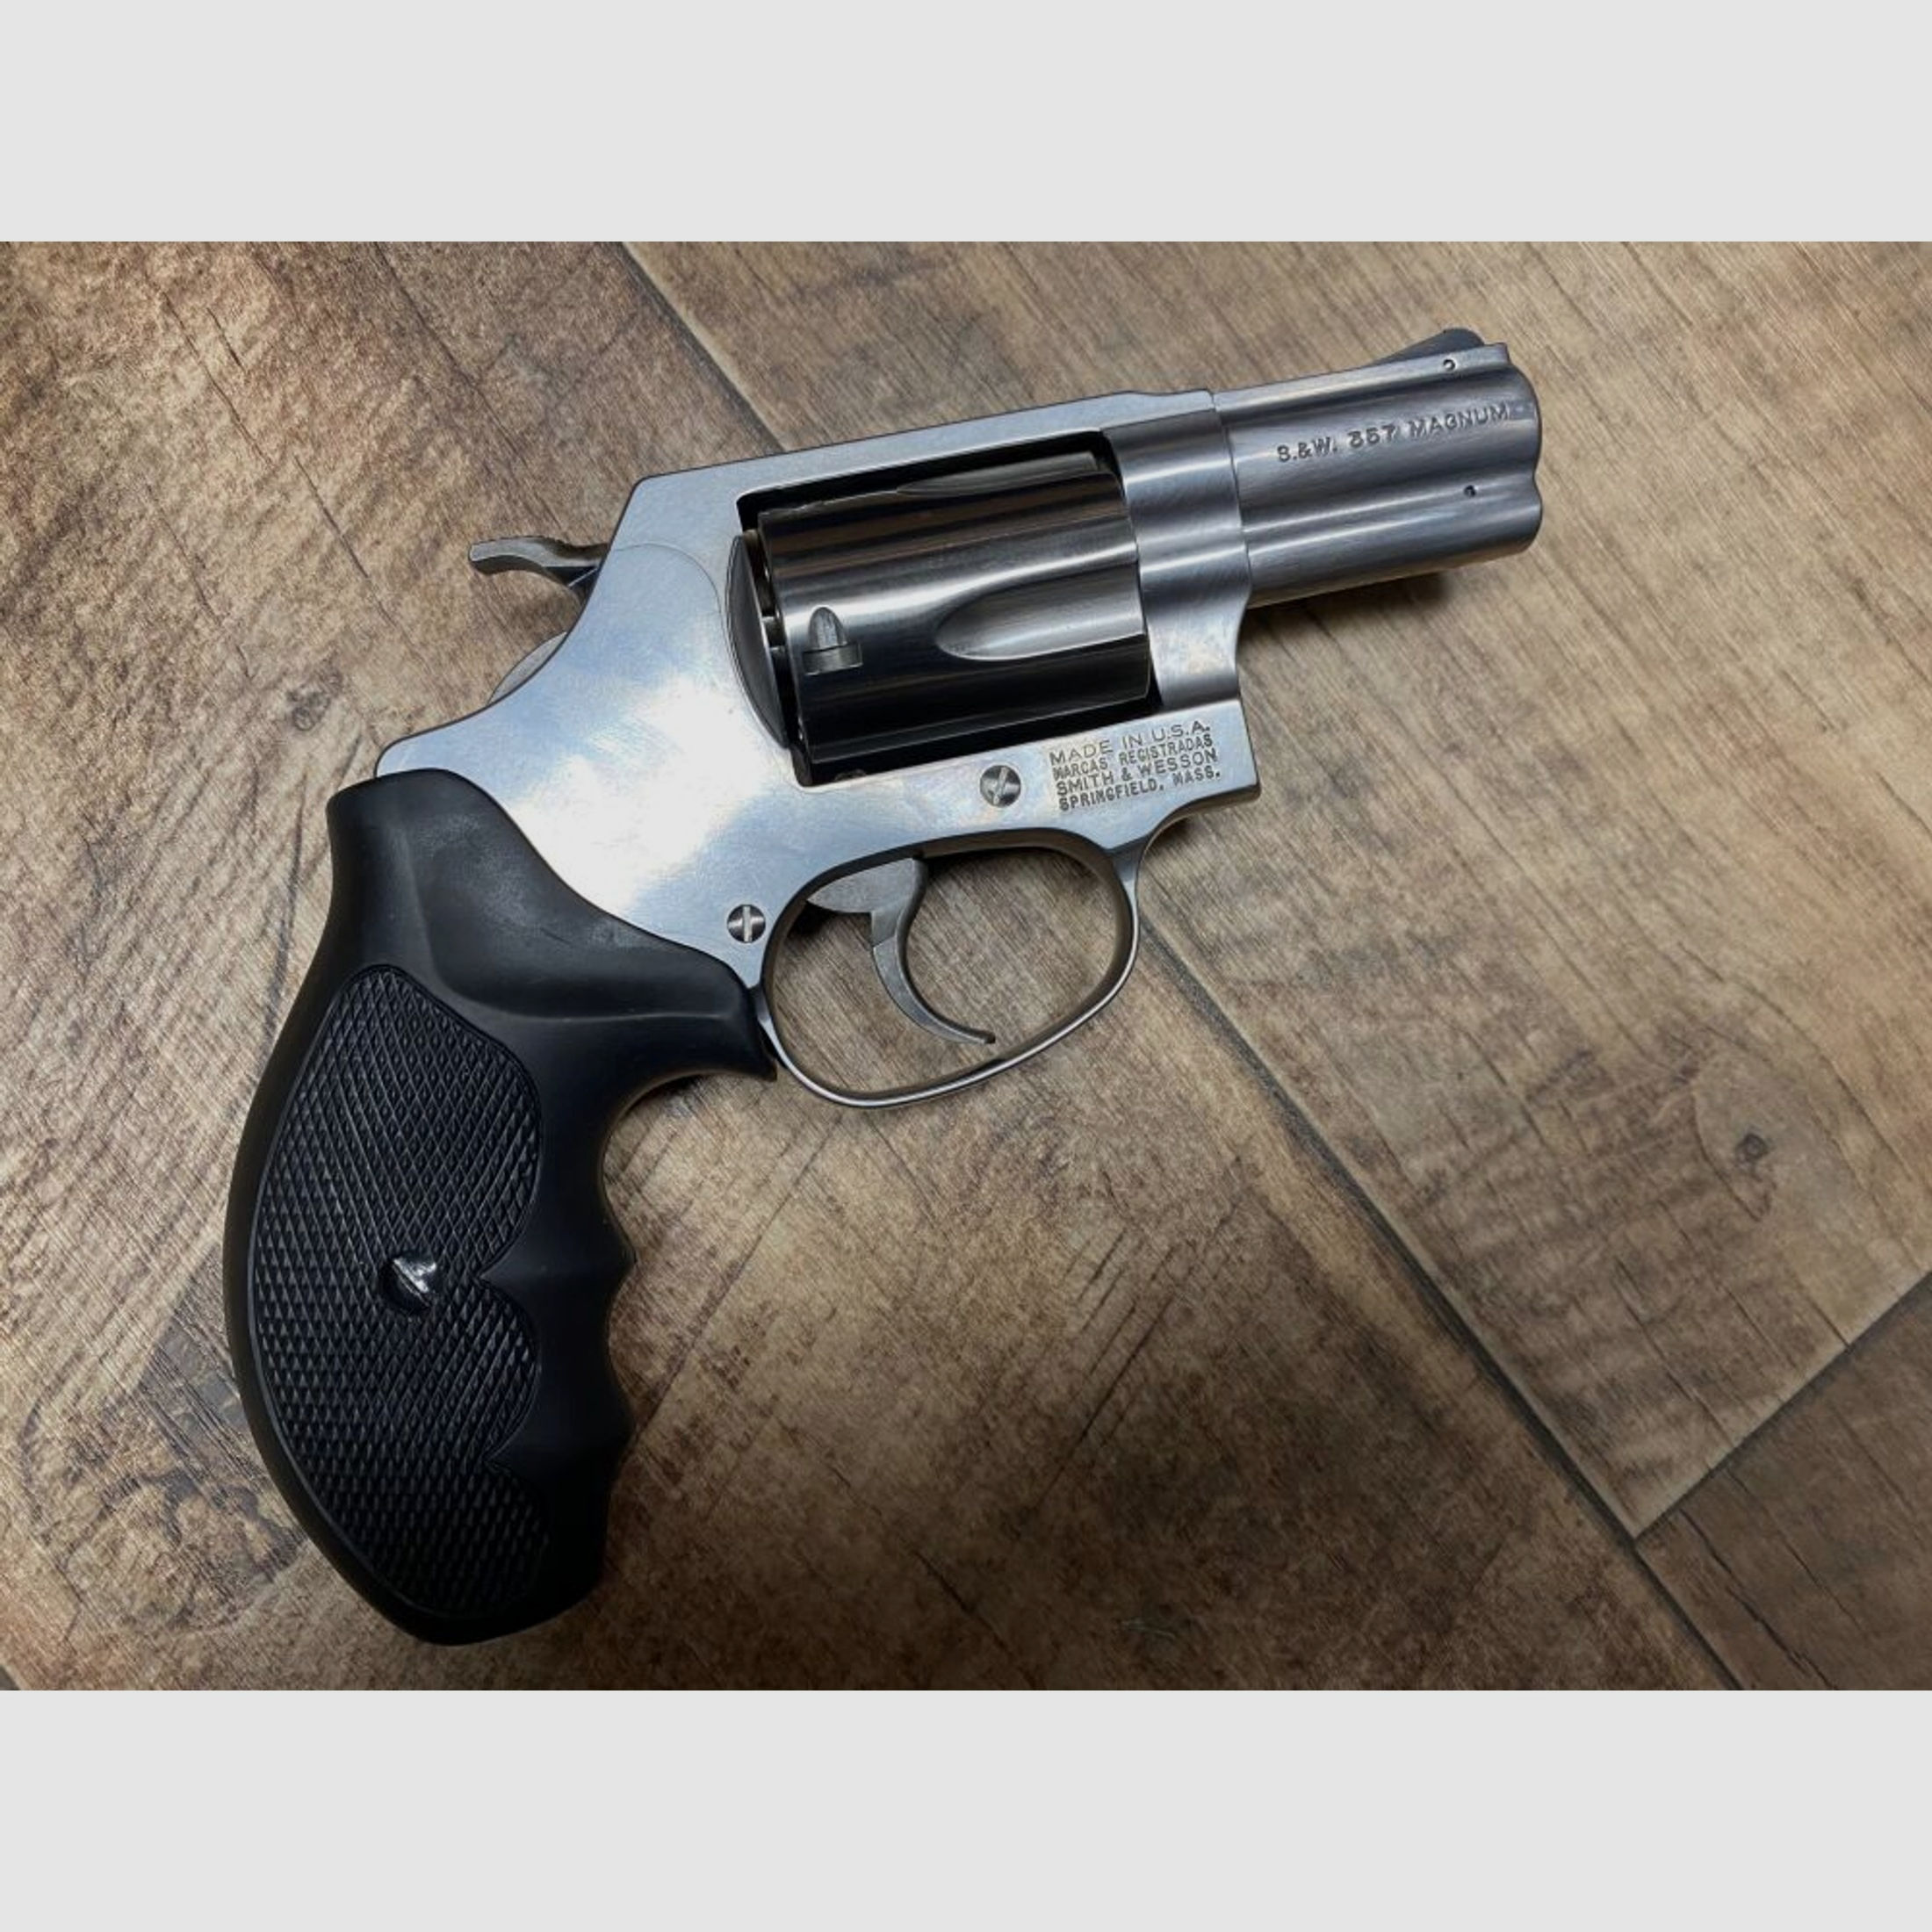 Smith & Wesson 60-9	 .357Mag